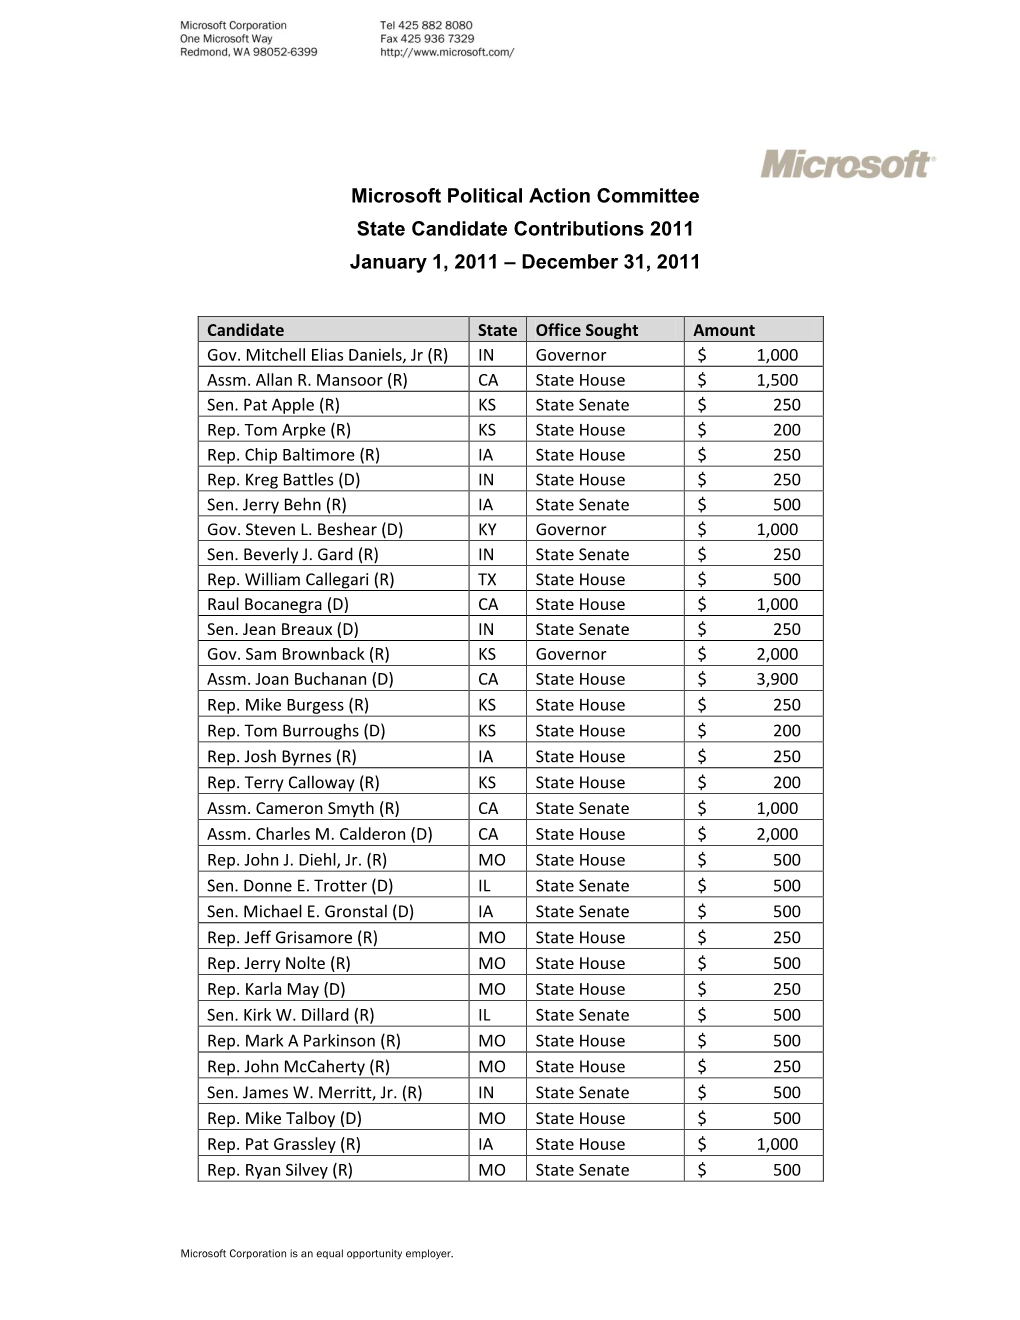 Microsoft Political Action Committee State Candidate Contributions 2011 January 1, 2011 – December 31, 2011